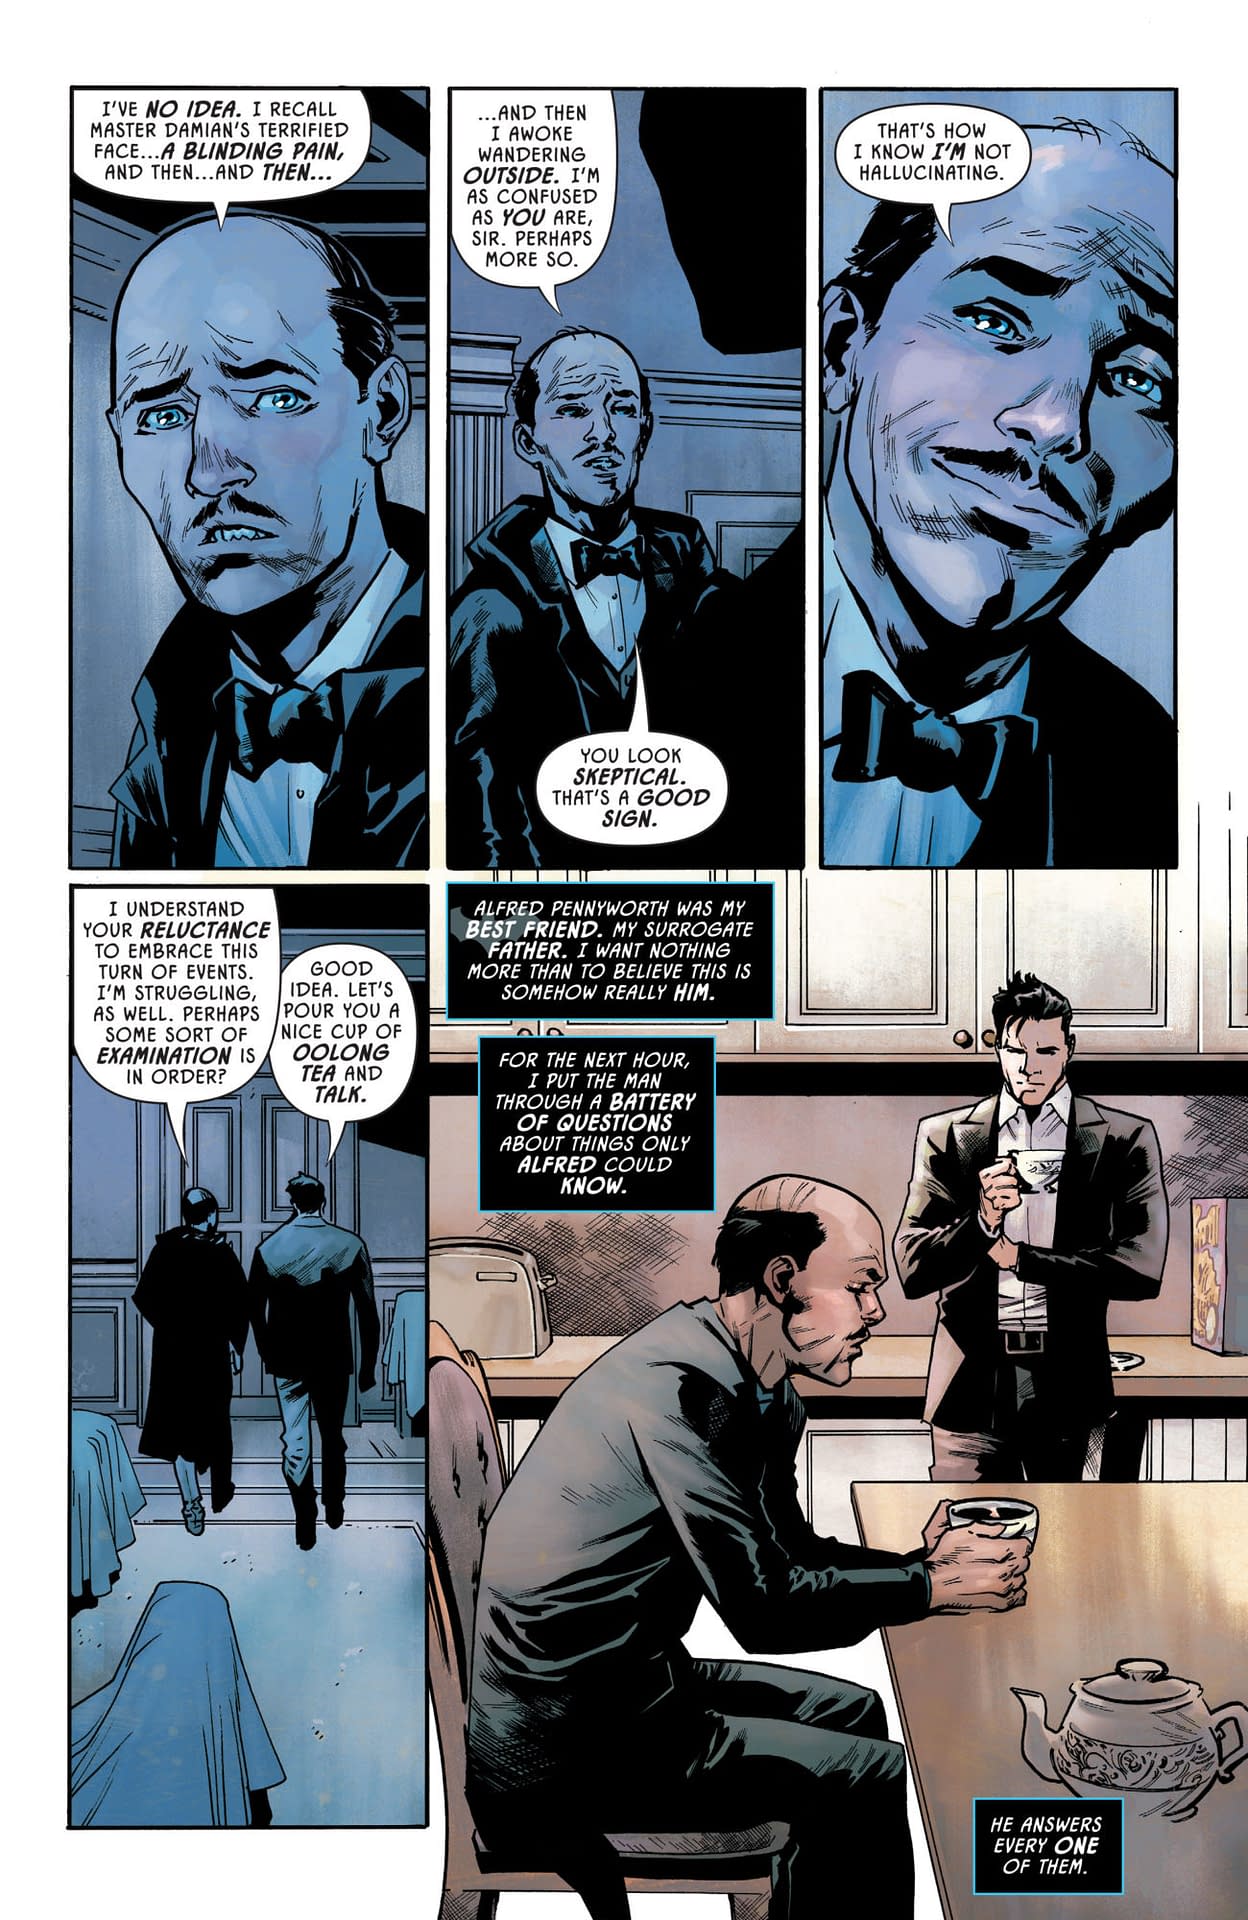 BatGossip: The Return Of Alfred Pennyworth - And Someone Else Entirely